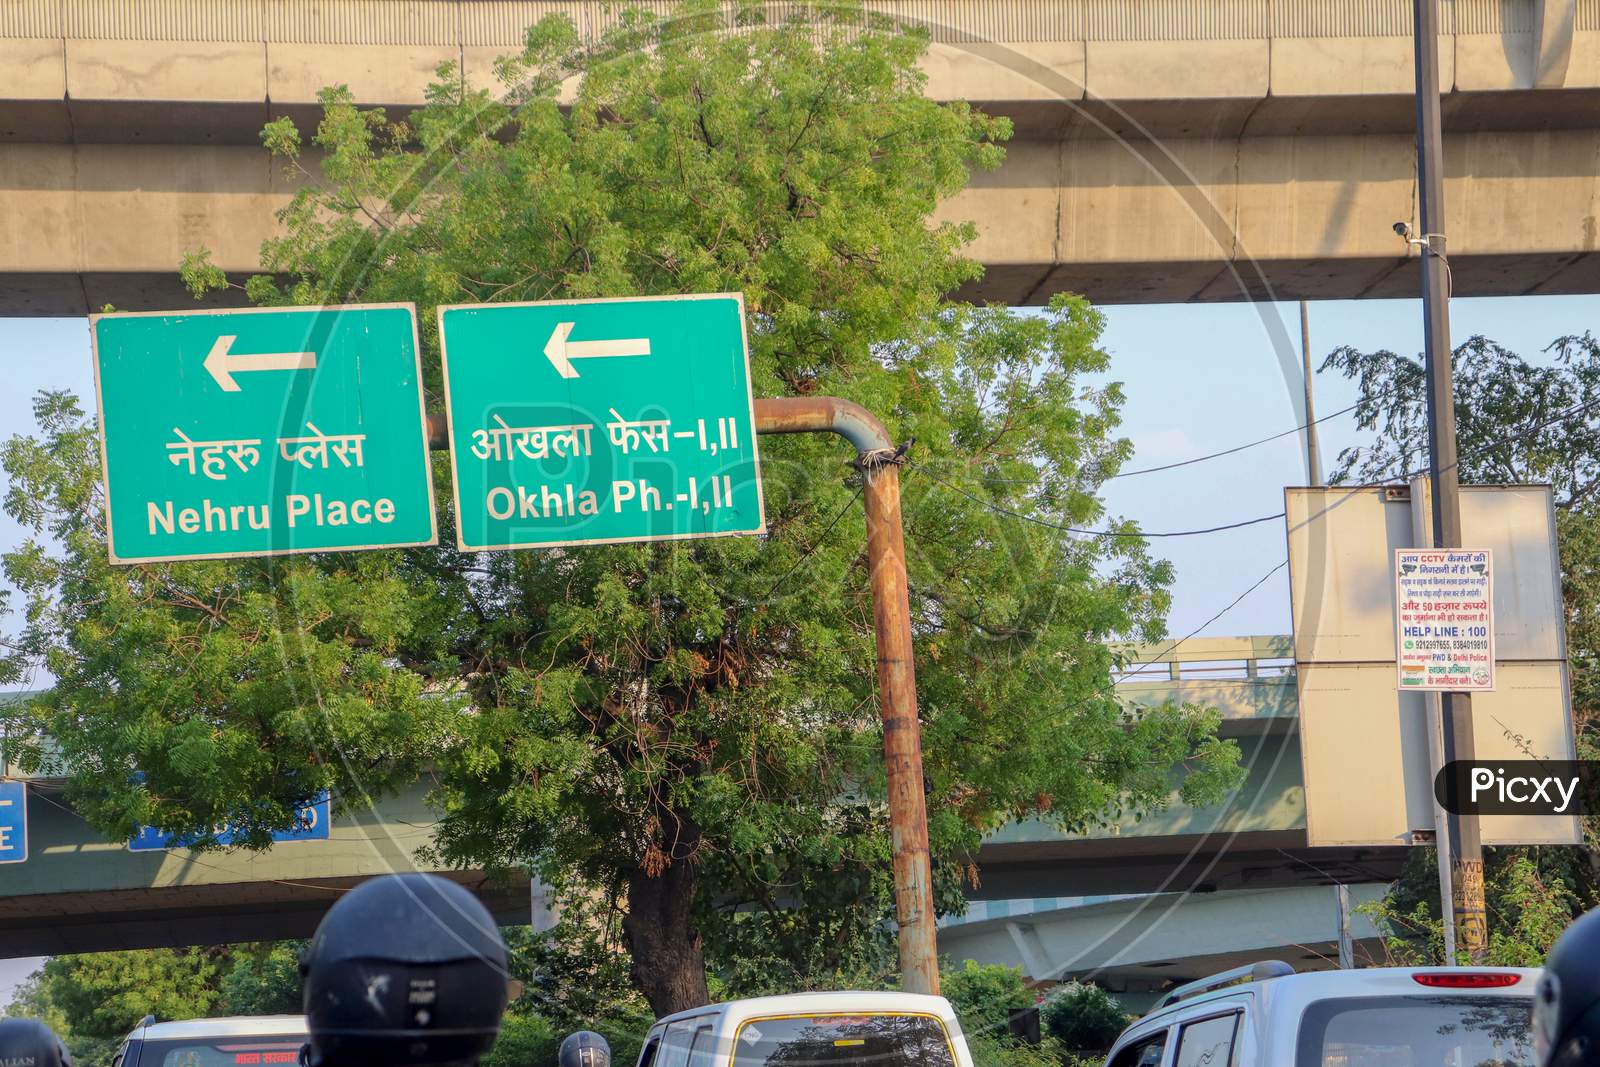 "New Delhi/India-21.06.2020: traffic sign Boards Direction from Nehru place and ohkla Ph I,II  near Tree Car , and Traffic Light "